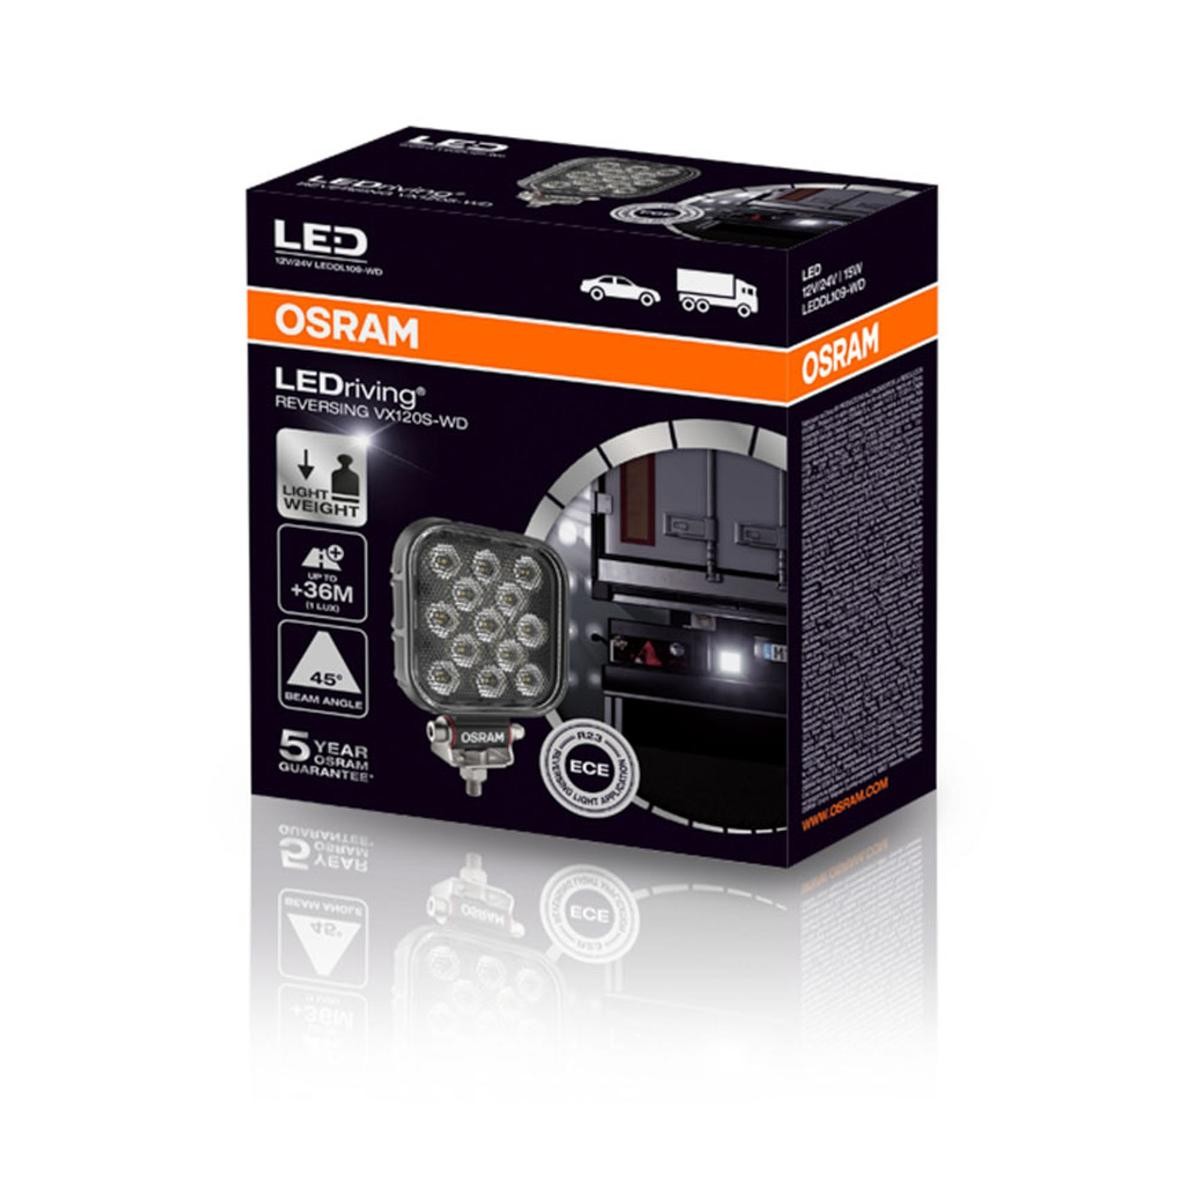 Rover Reverse Light OSRAM LEDDL109-WD at a good price